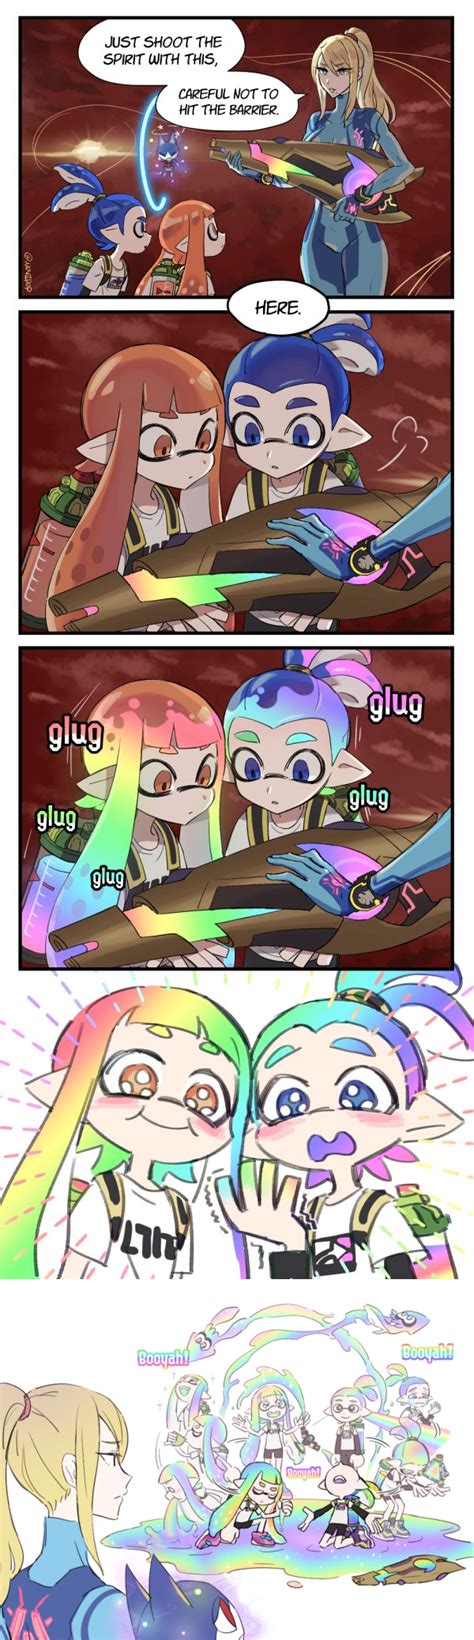 ~every Inklings Dream~ Super Smash Brothers Ultimate Know Your Meme